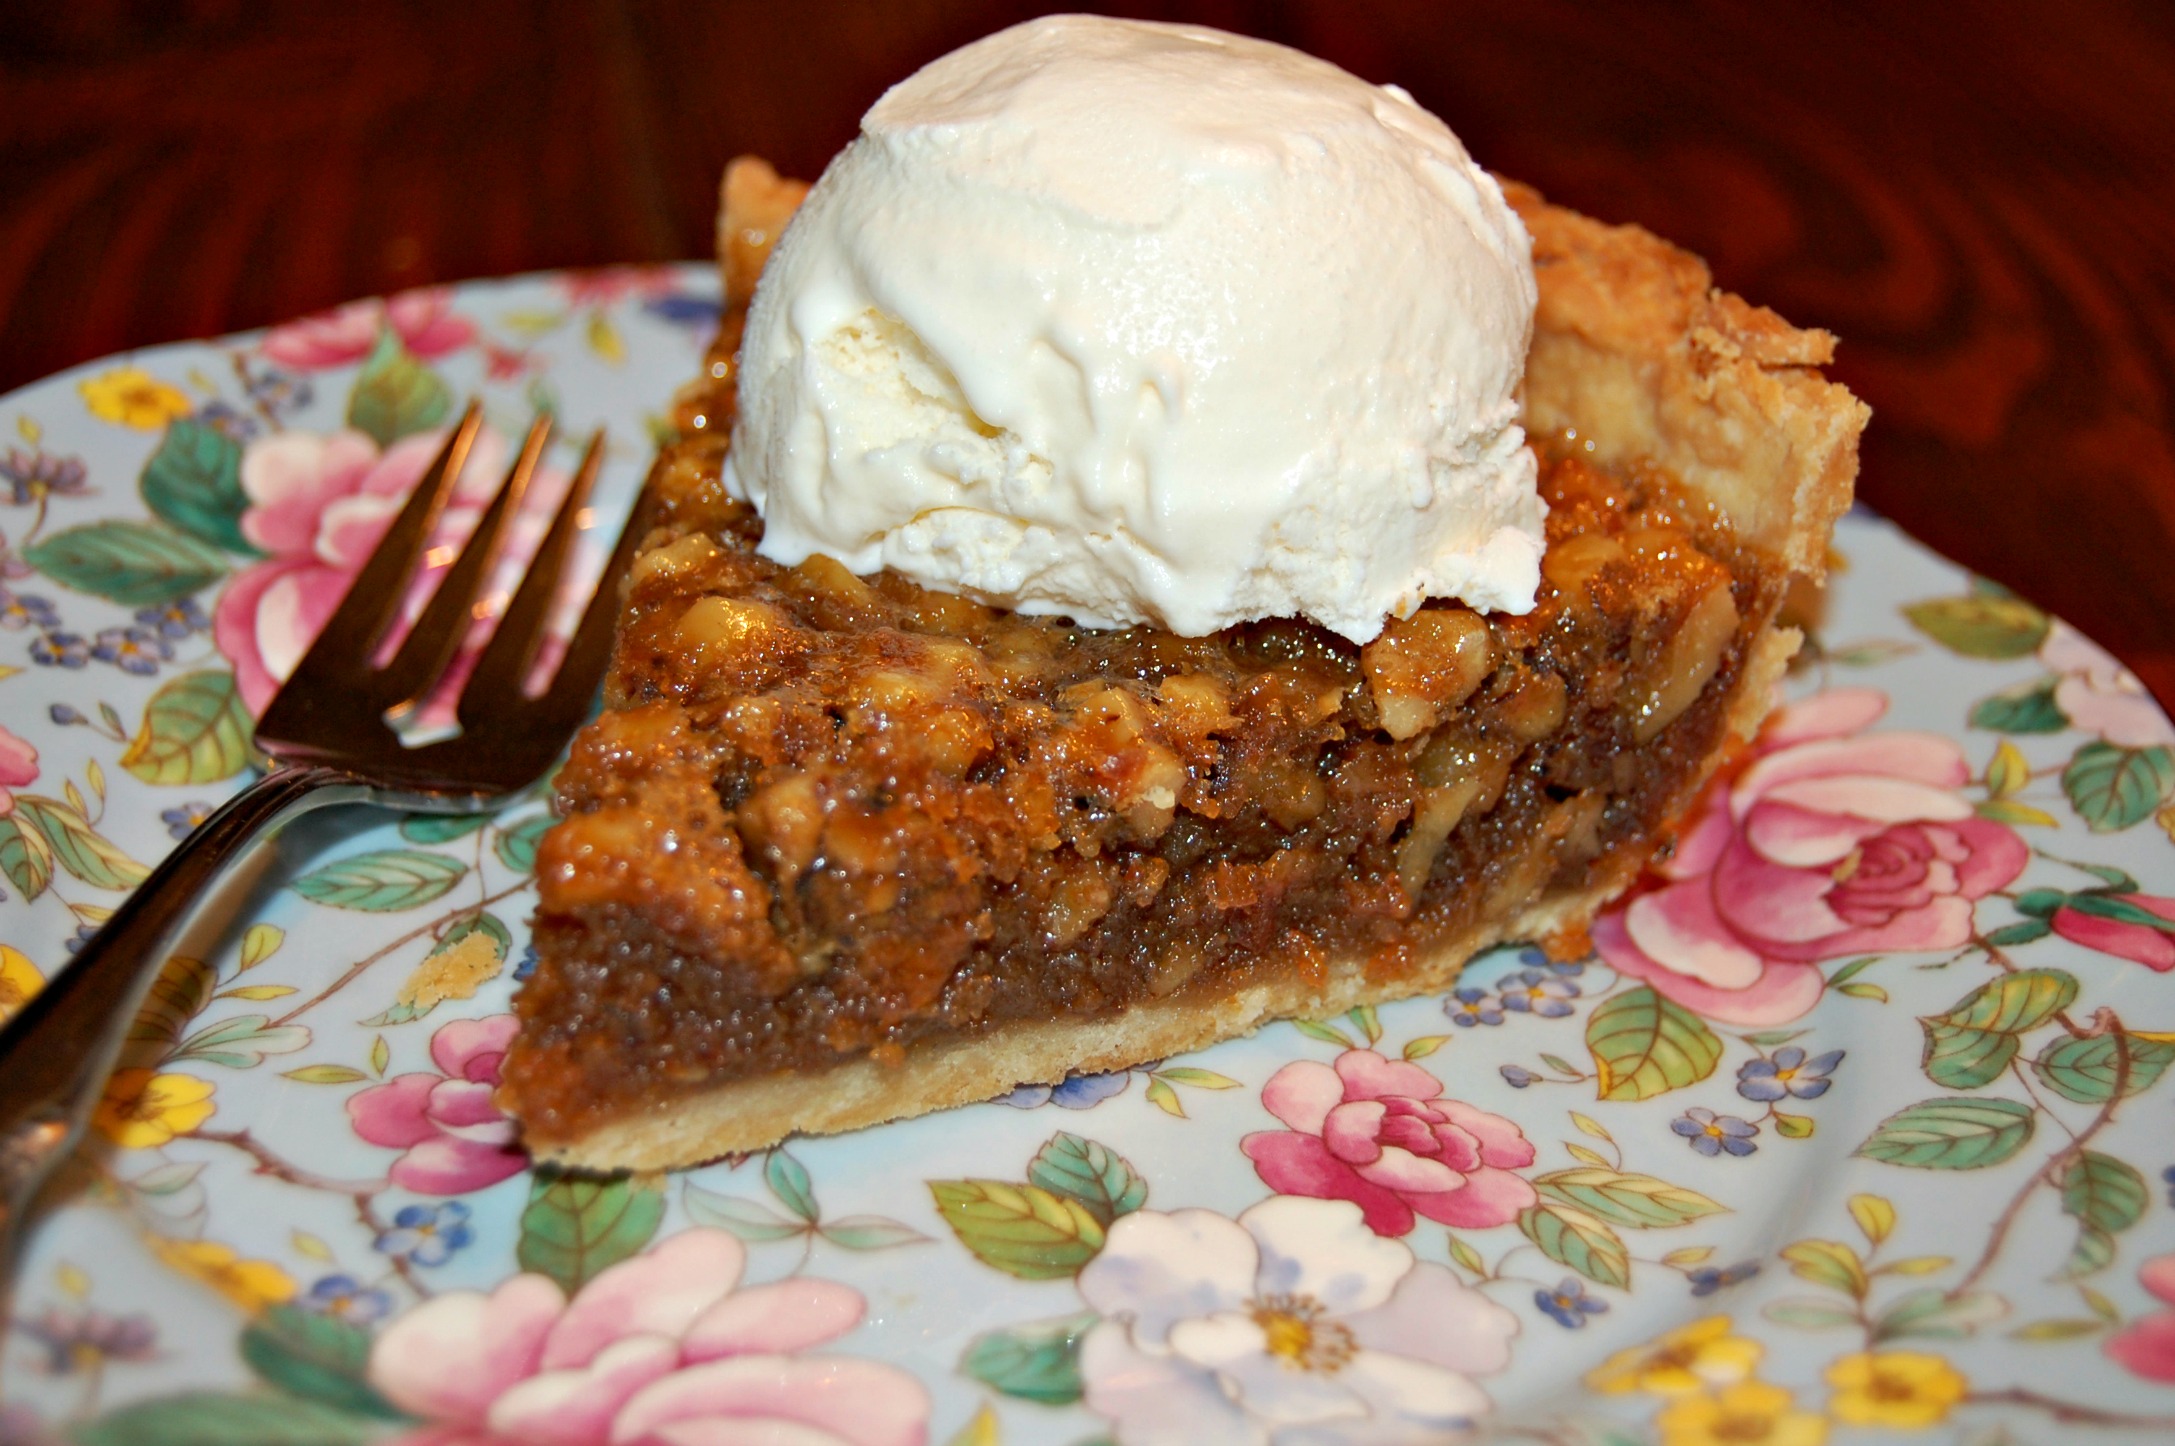 Toasted Walnut Pie. A less sweet version of Pecan Pie.